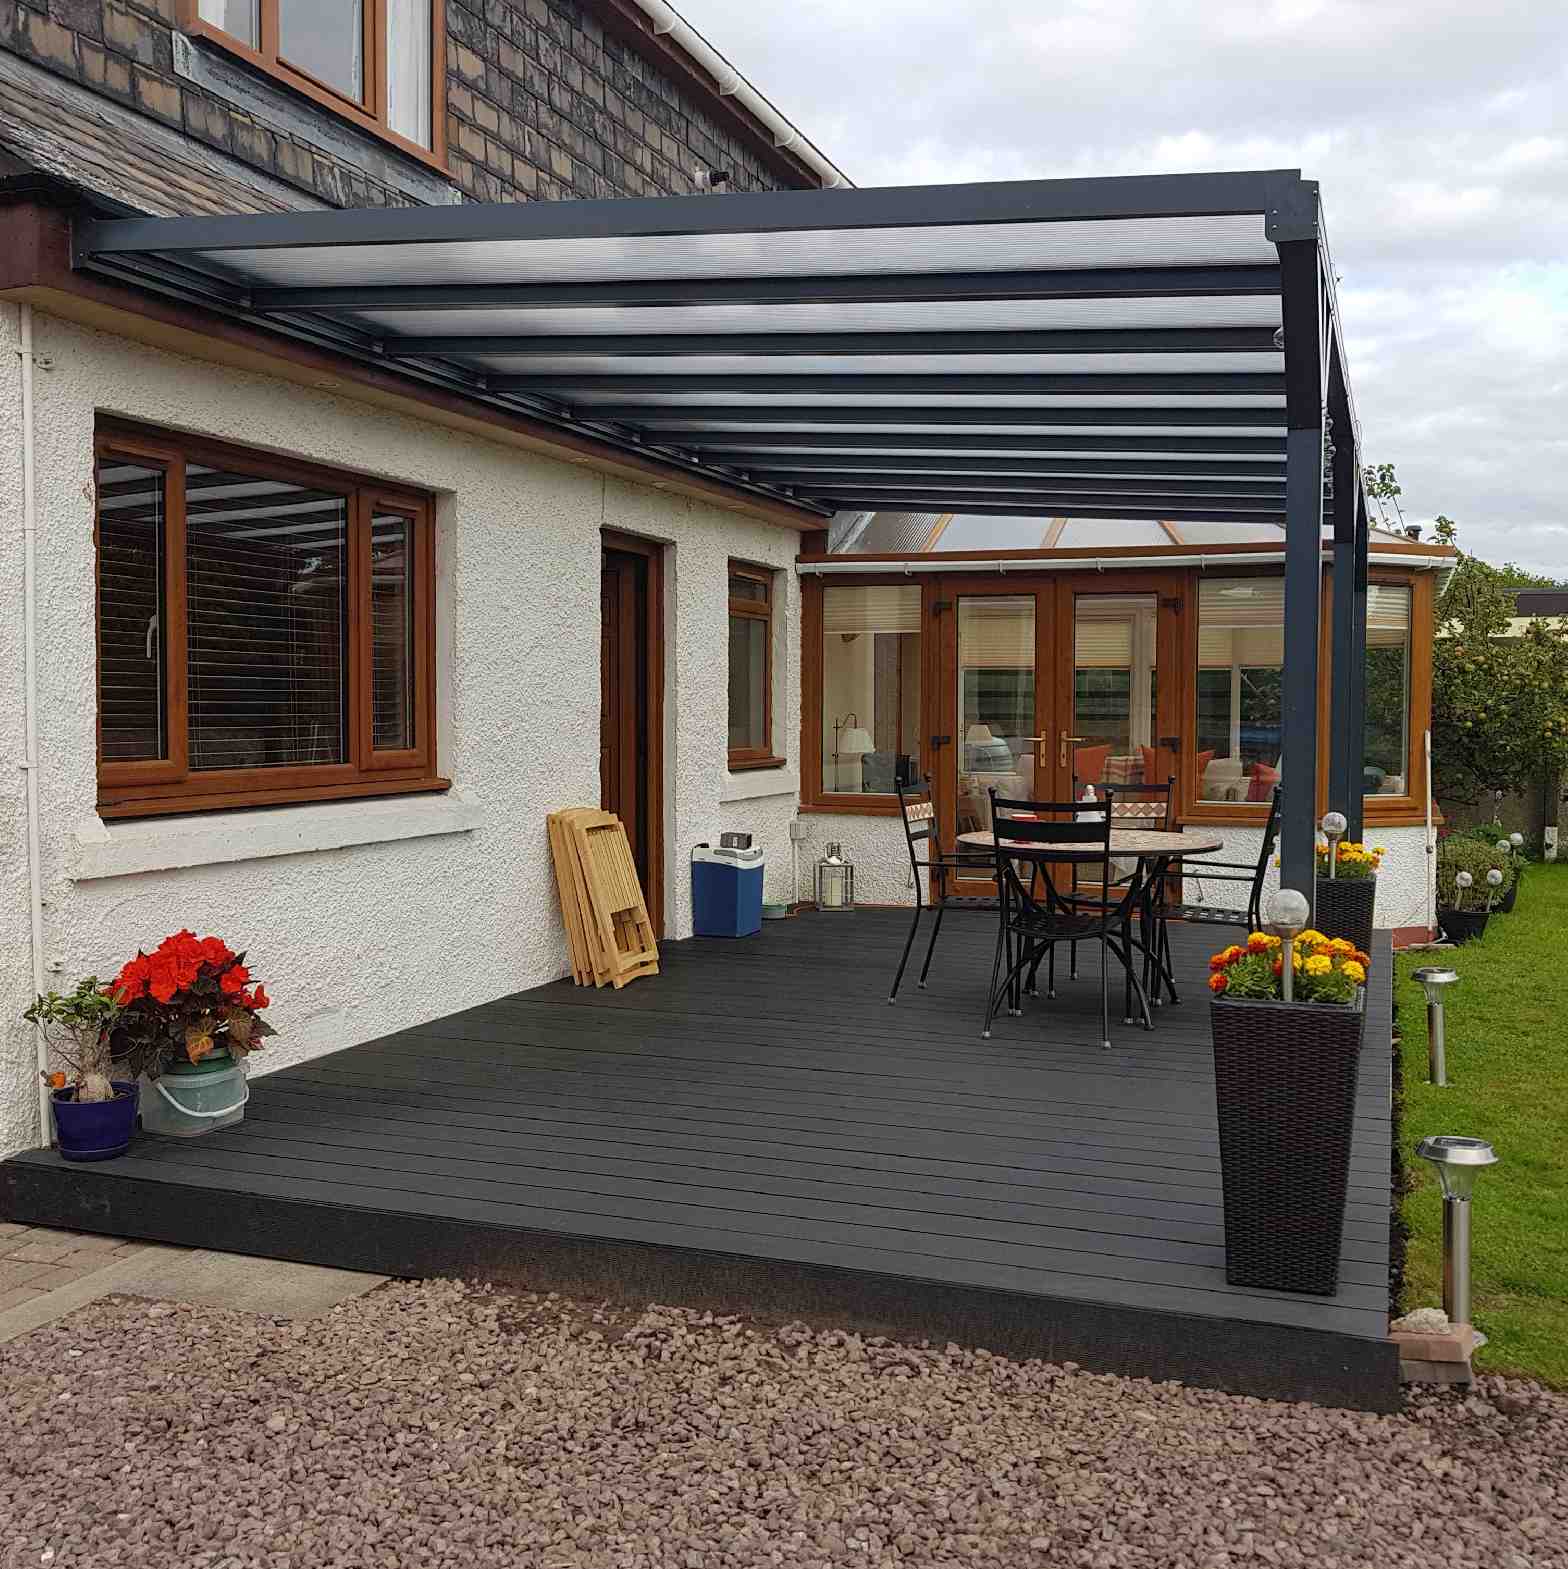 Buy Omega Verandah, Anthracite Grey, 16mm Polycarbonate Glazing - 3.1m (W) x 3.0m (P), (2) Supporting Posts online today